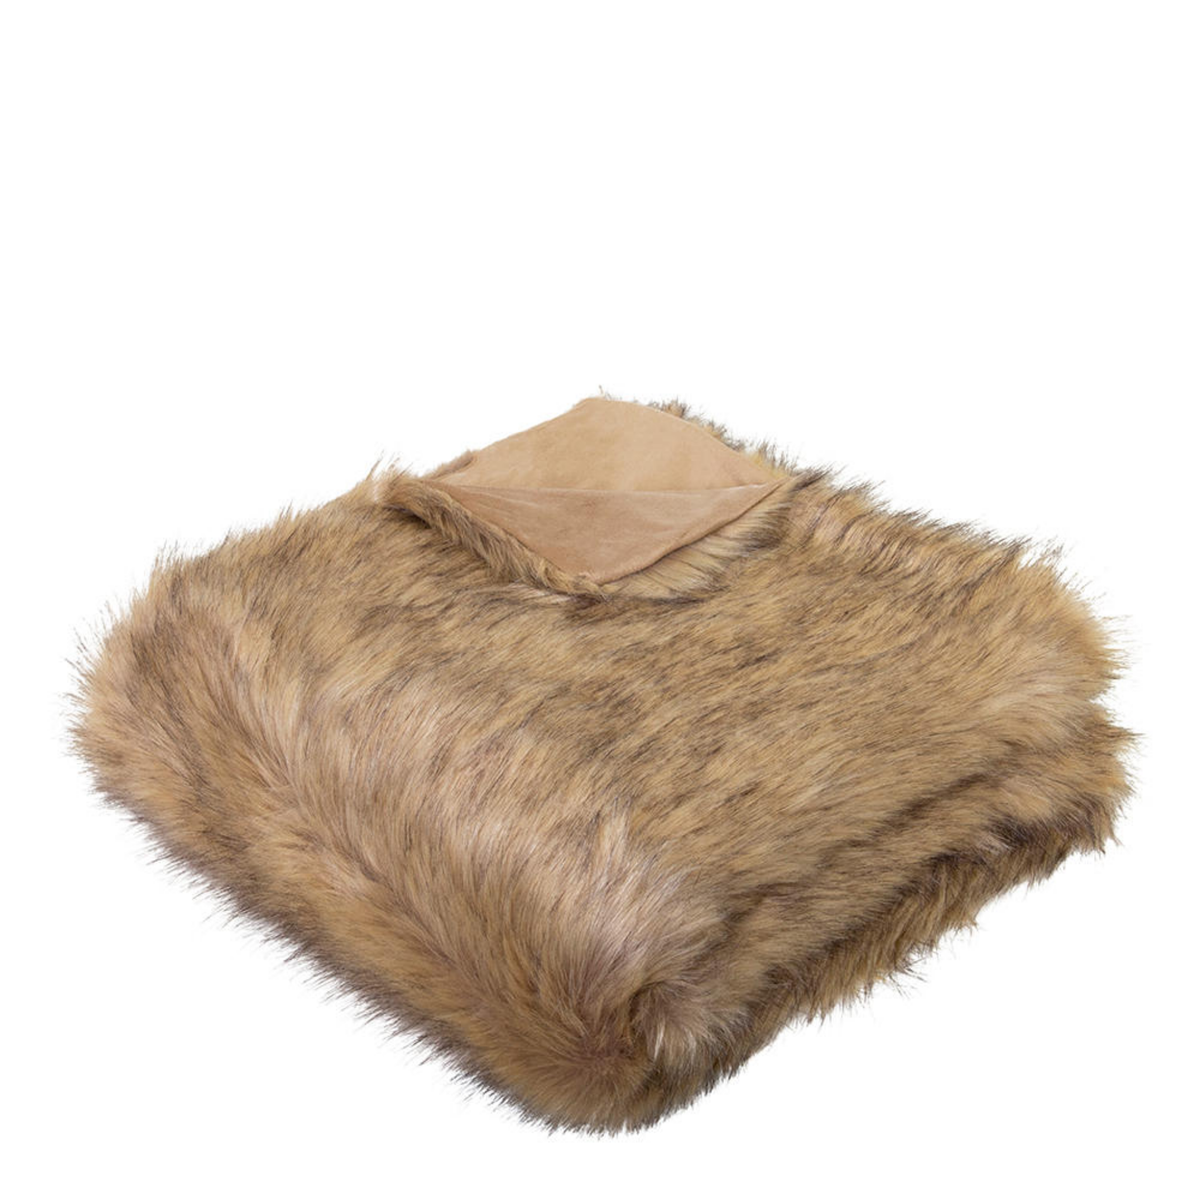 GRIZZLY FAUX FUR THROW - BROWN